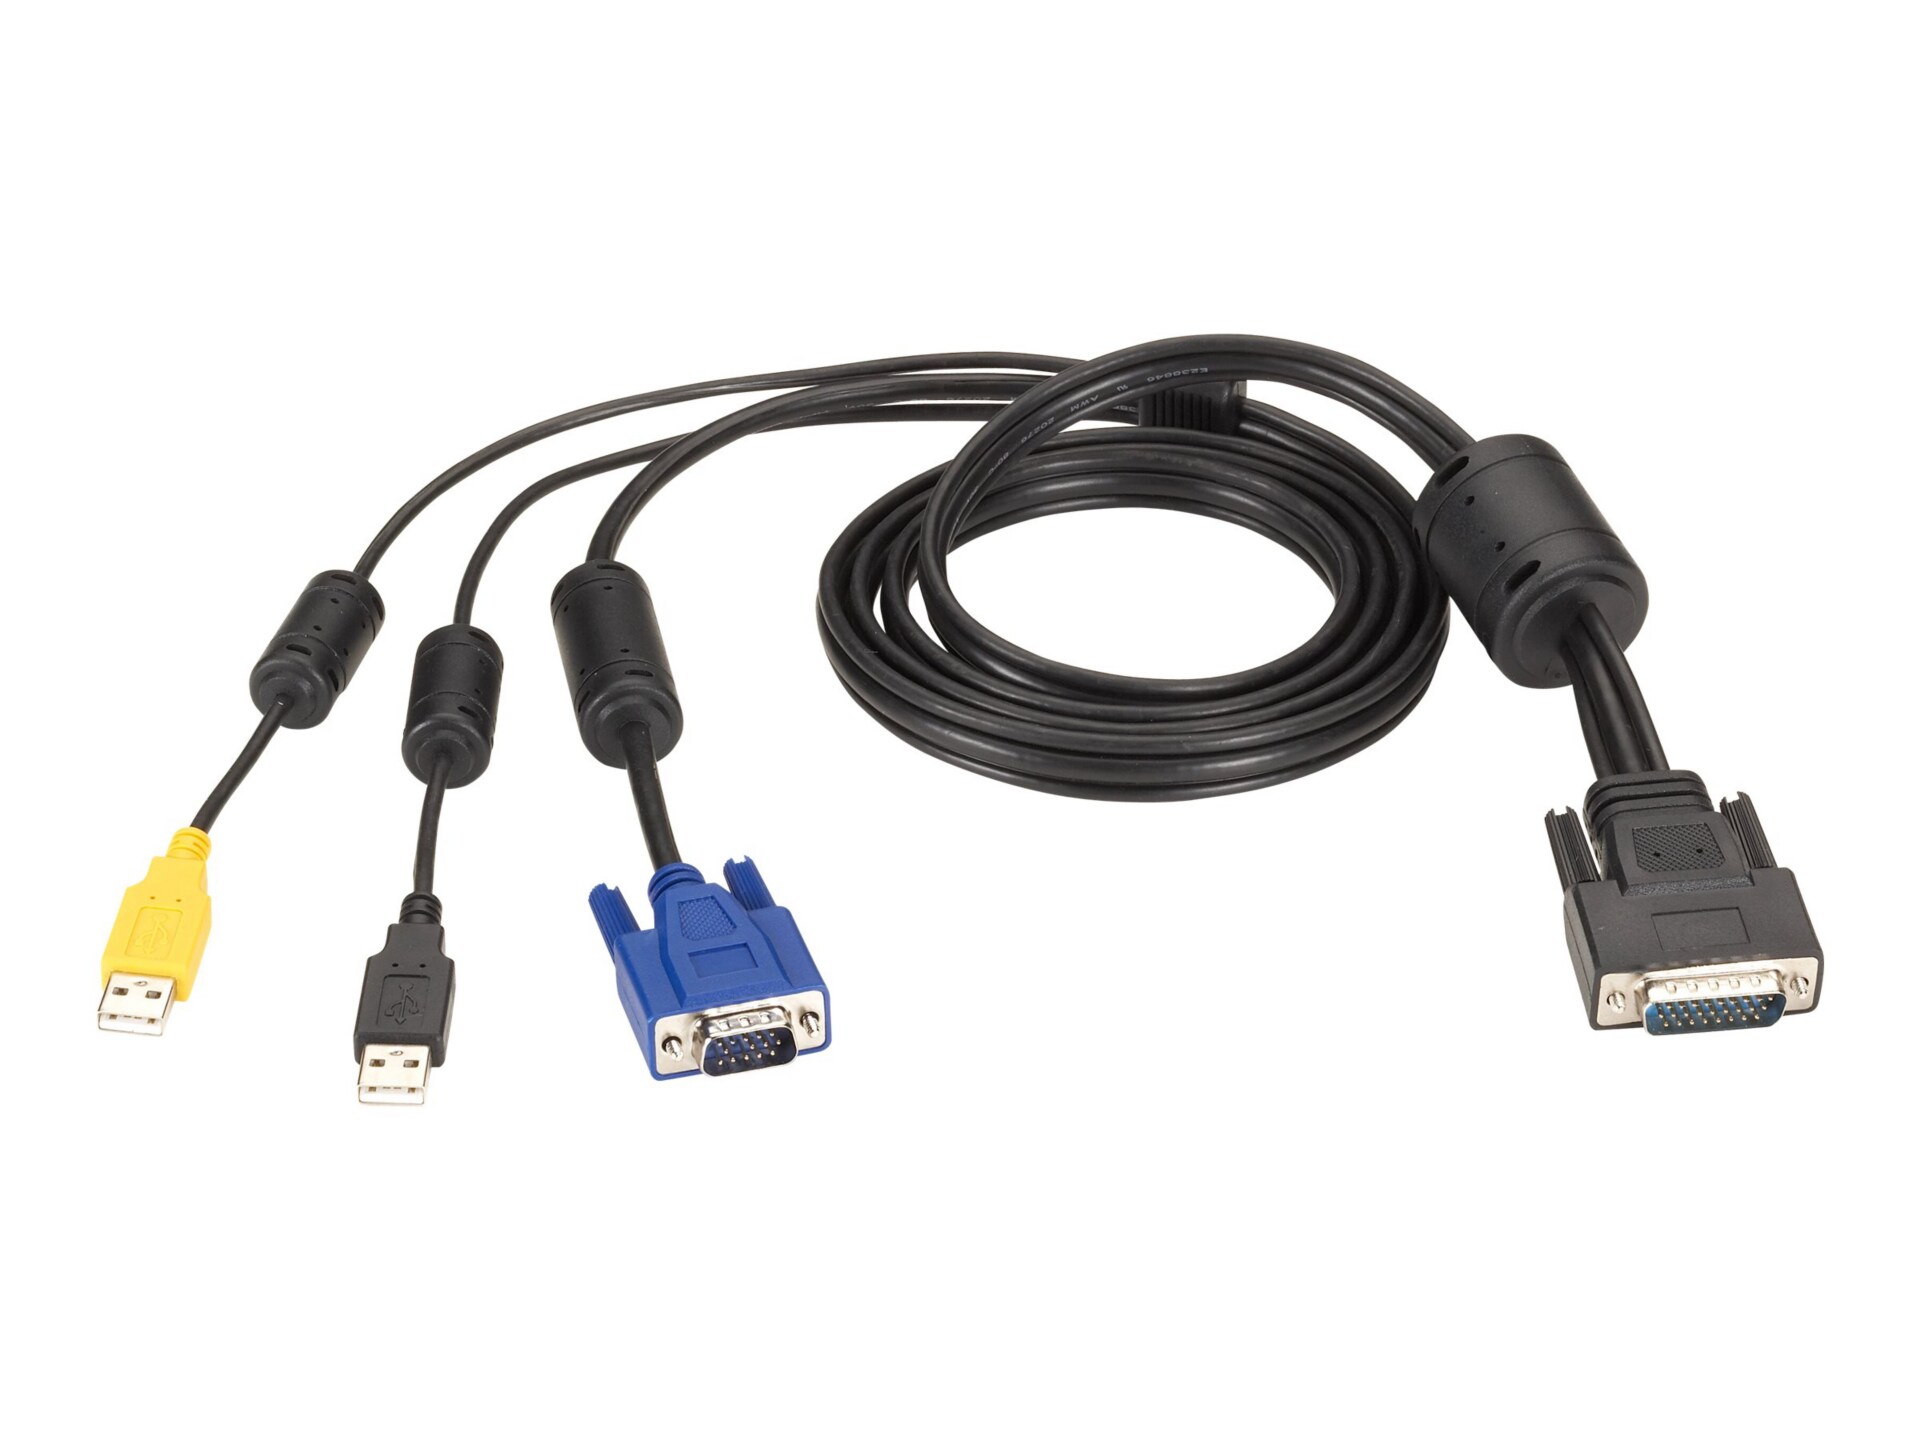 Black Box ServSwitch Secure KVM Switch Cable - keyboard / video / mouse / USB cable - 6 ft